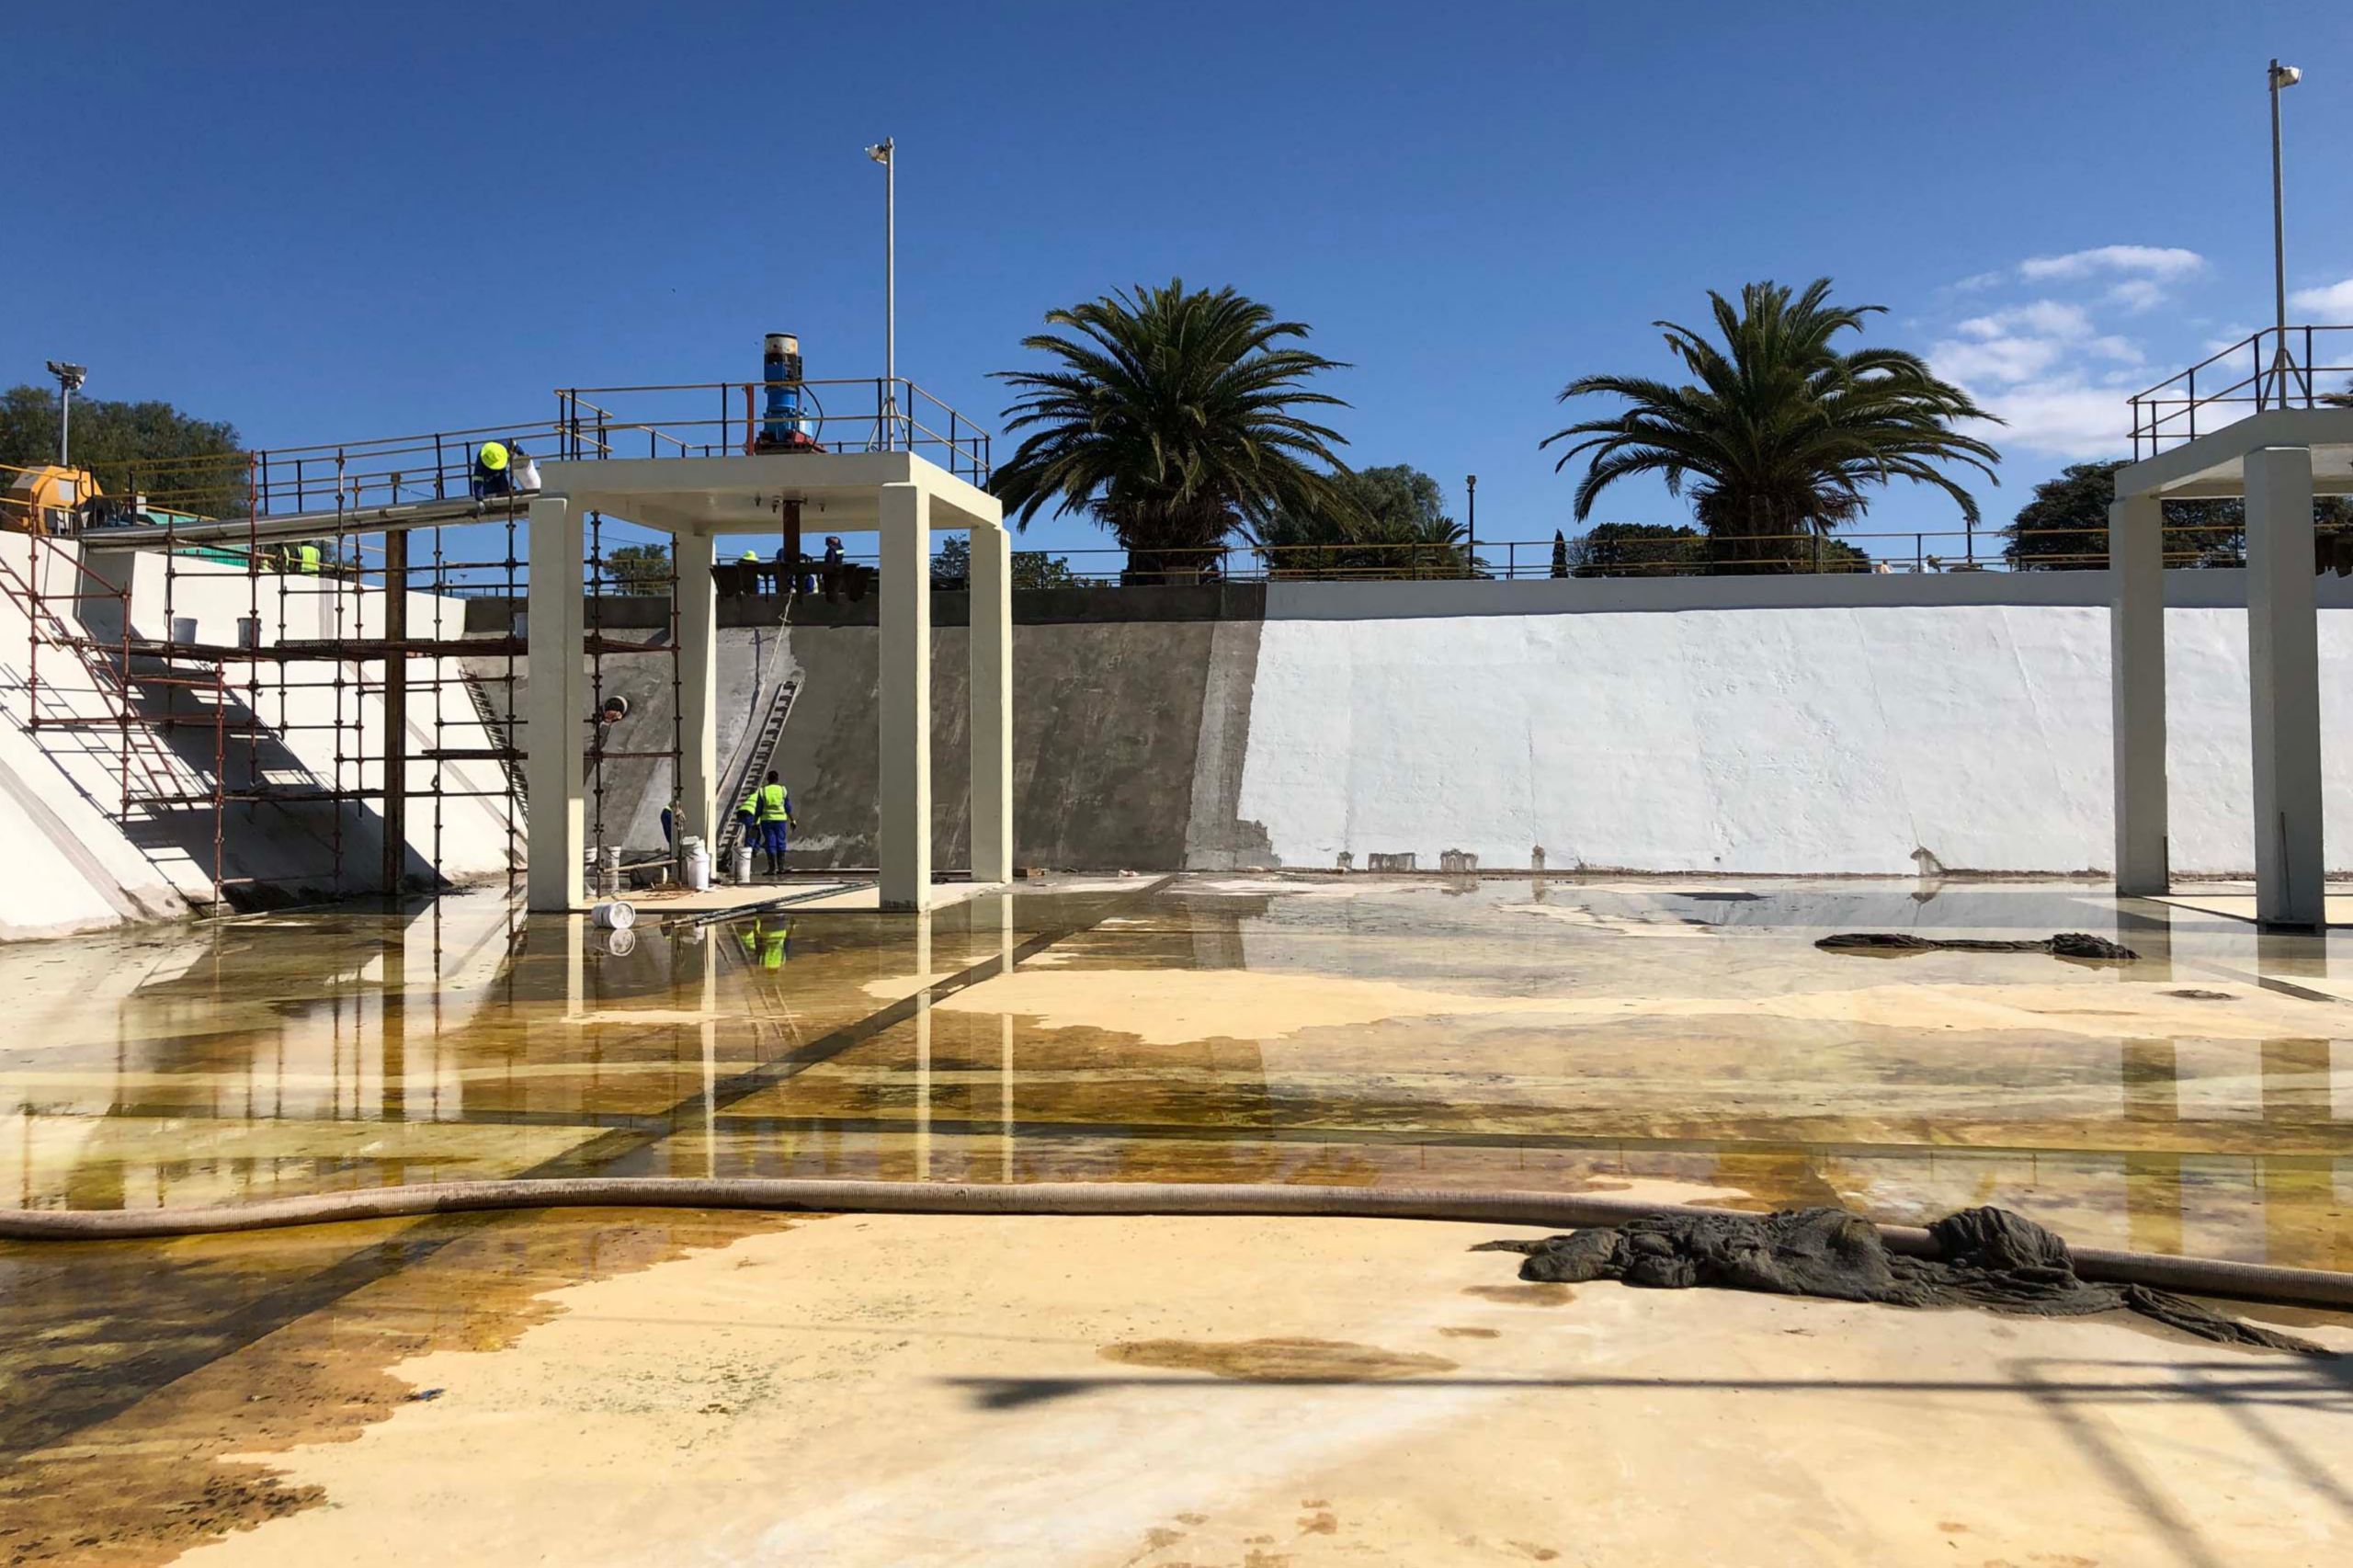 Restoration work in progress at wastewater treatment plant in Kwanobuhle.